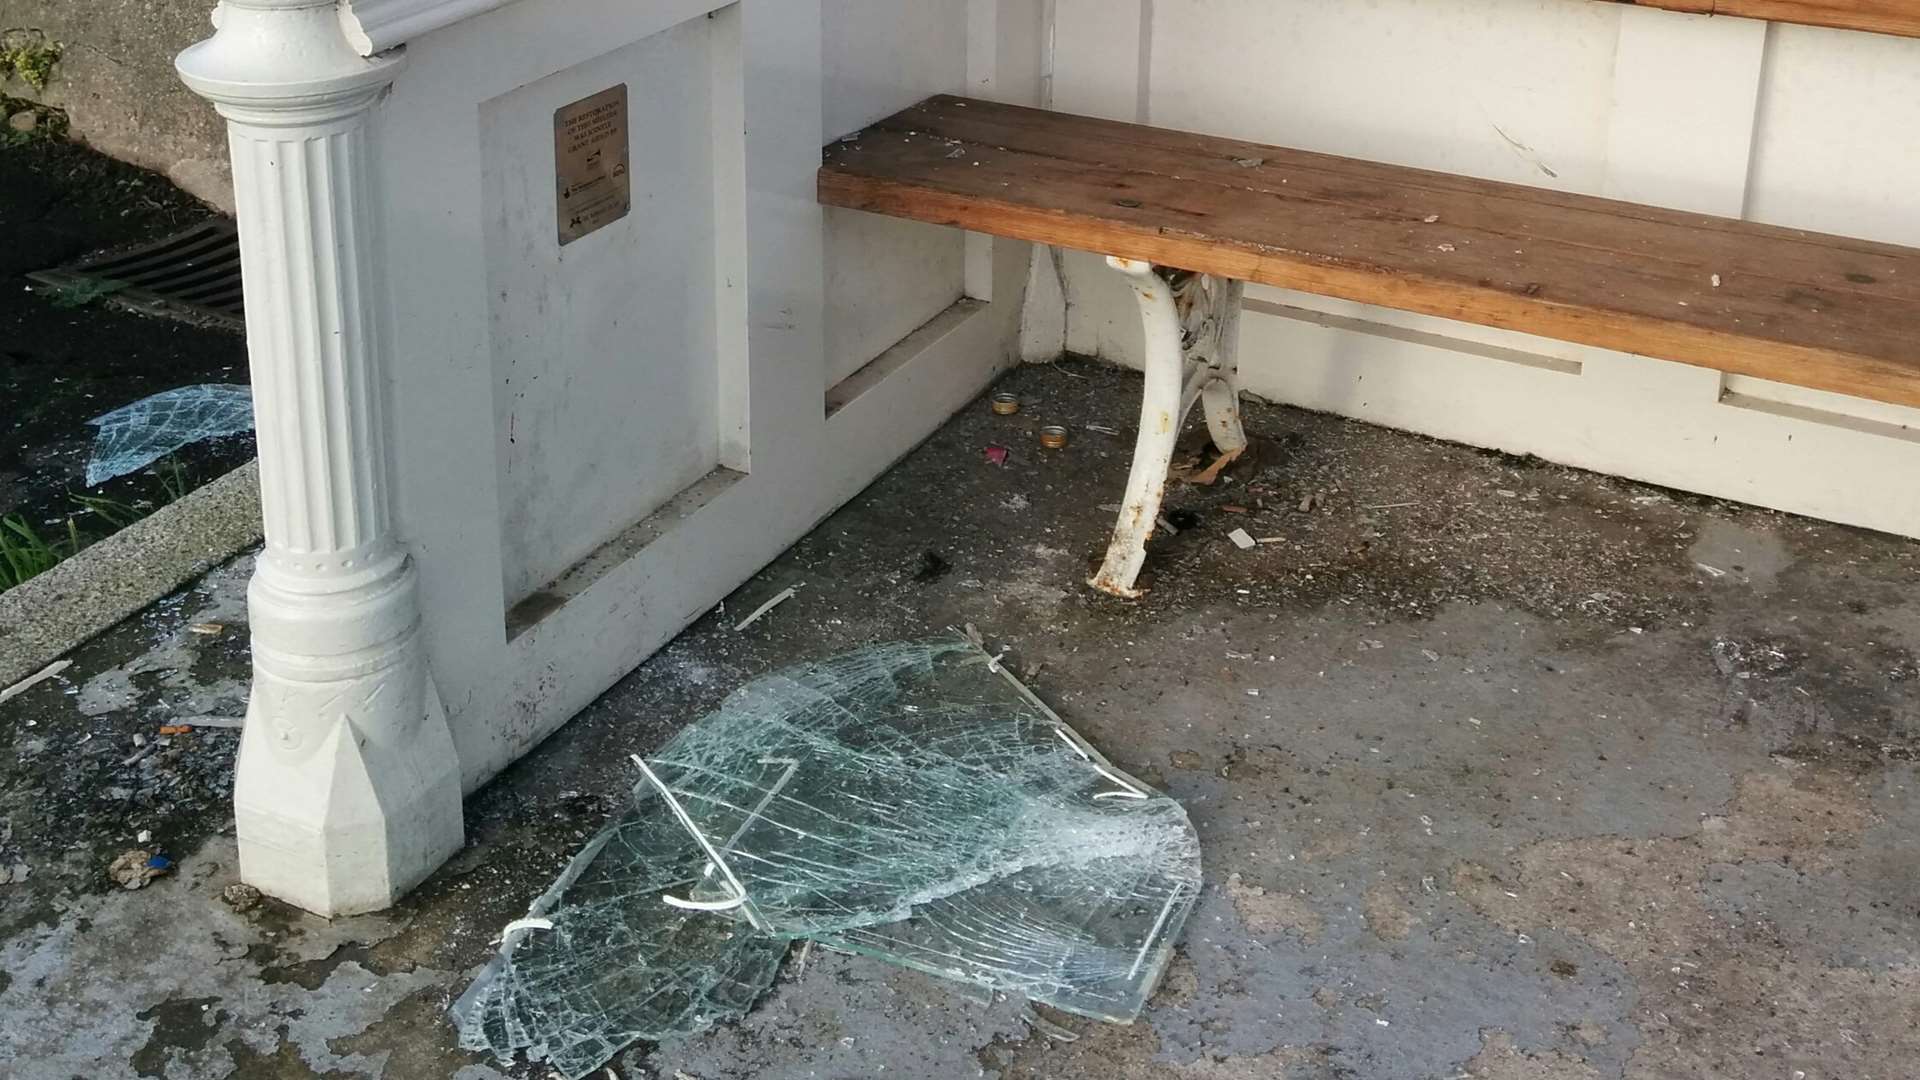 The shelter on Ramsgate seafront was targeted in the attack